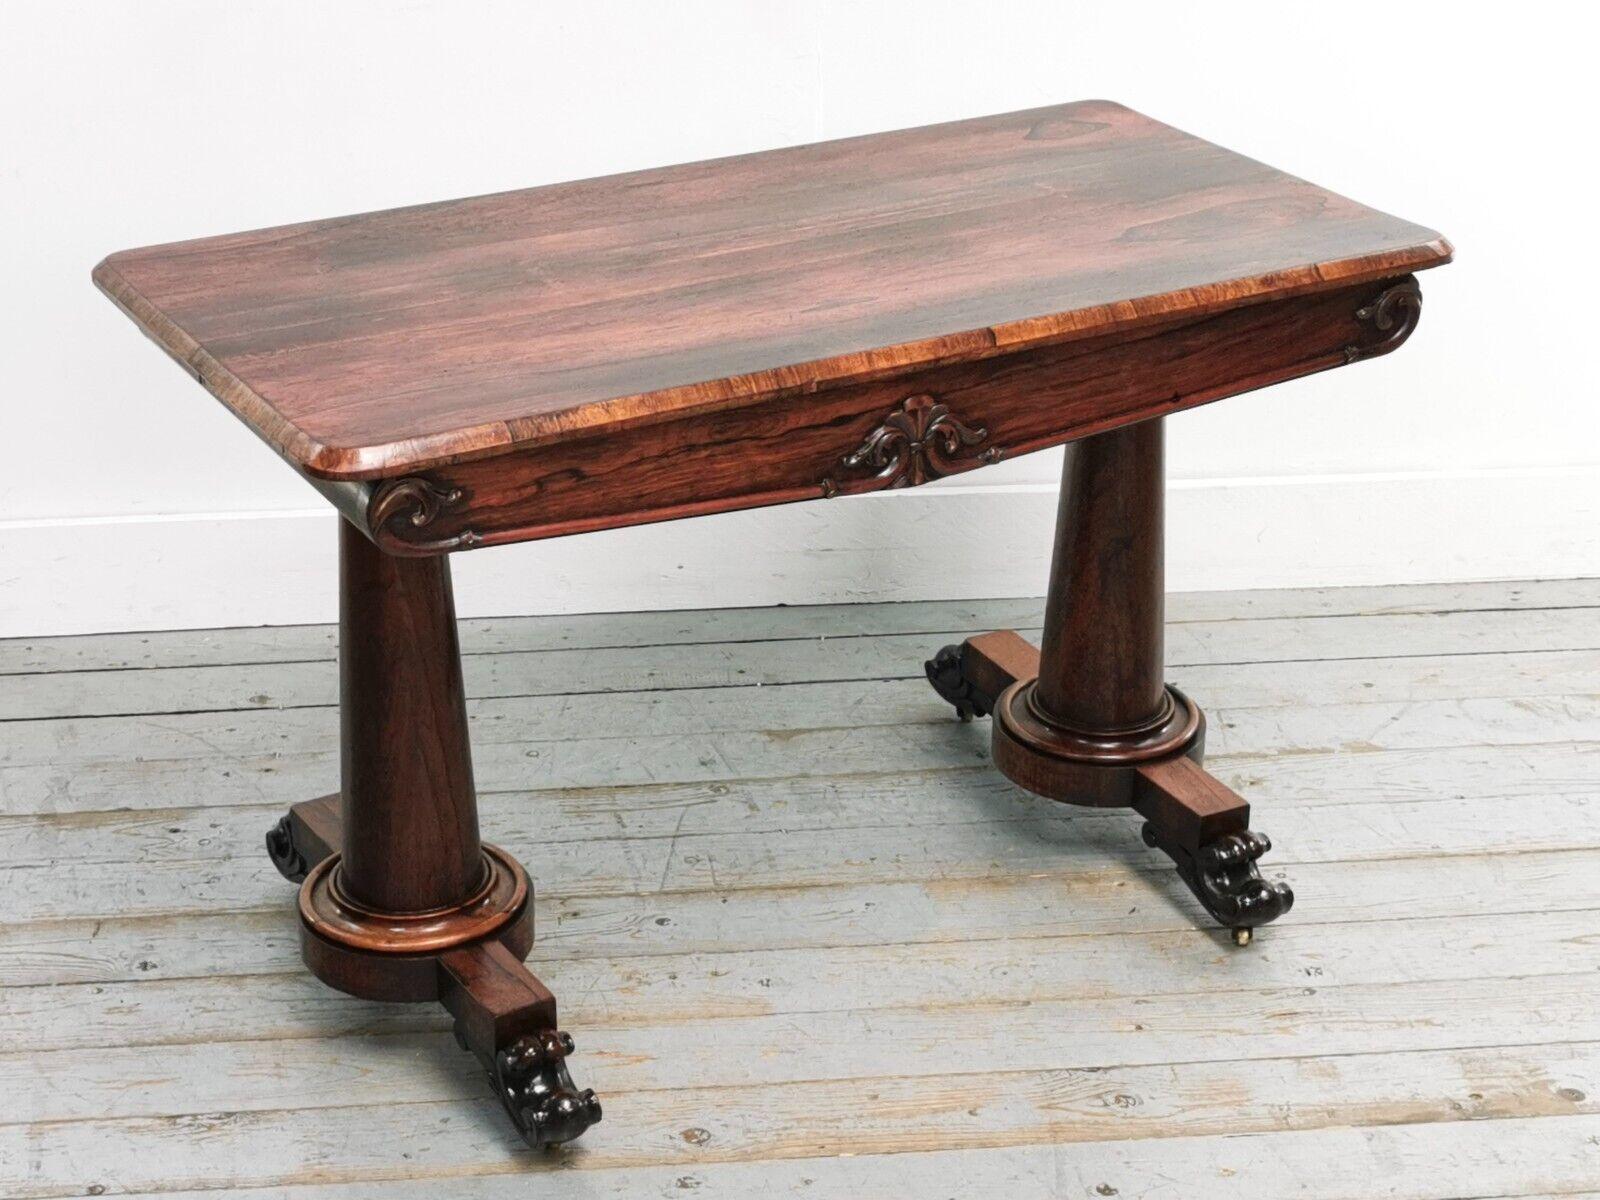 British Early 19th Century William IV Ornate Rosewood Library Table on Scrolling Feet